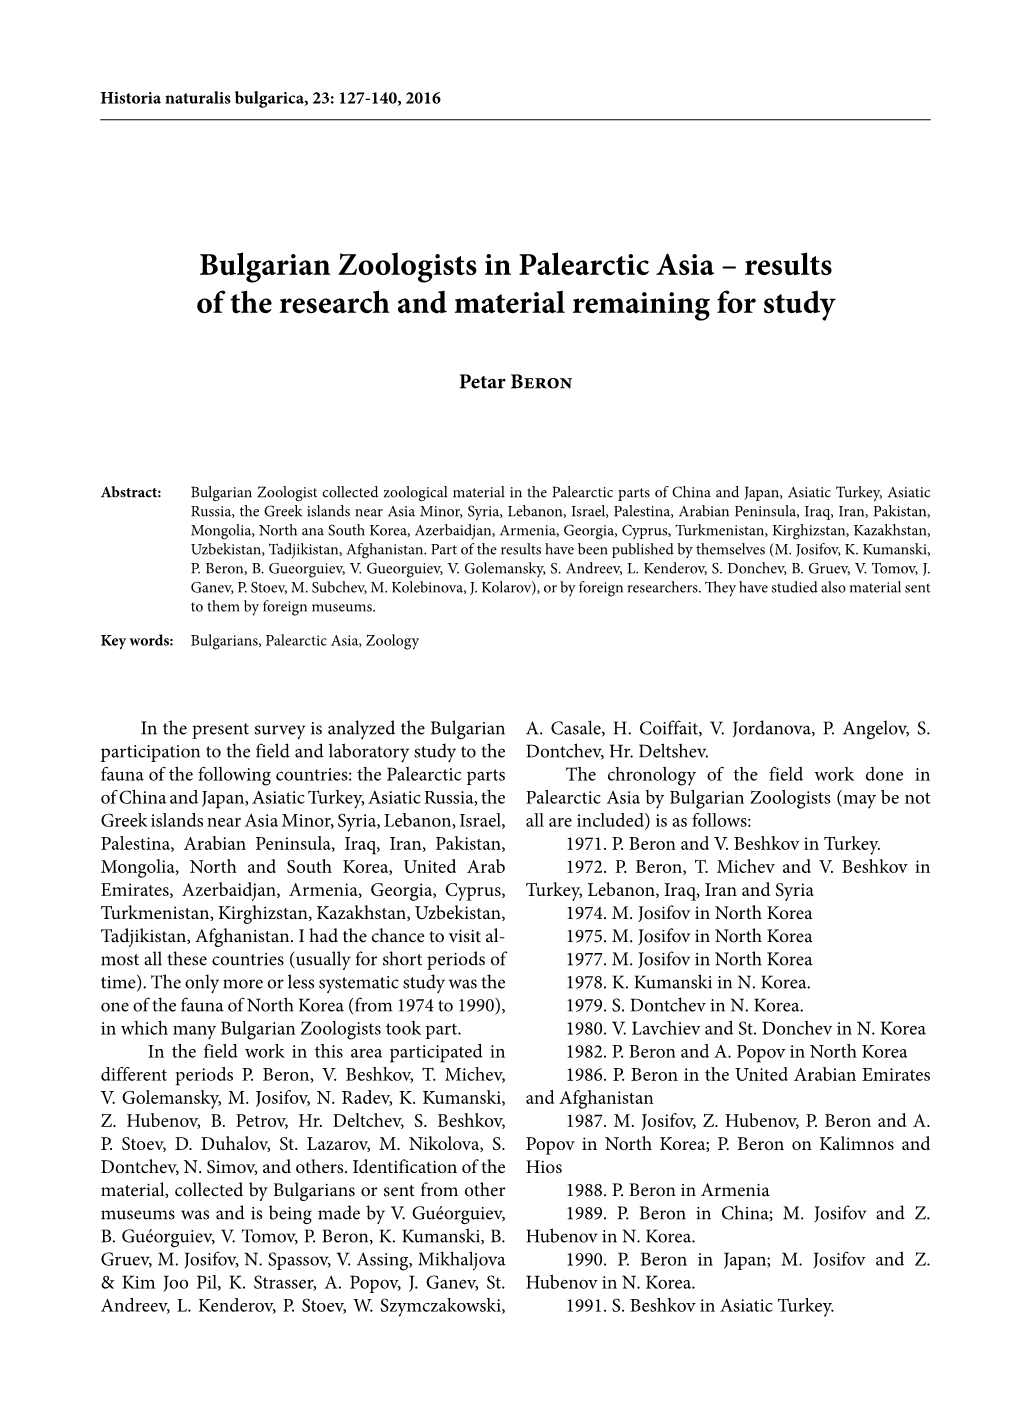 Bulgarian Zoologists in Palearctic Asia — Results of the Research And